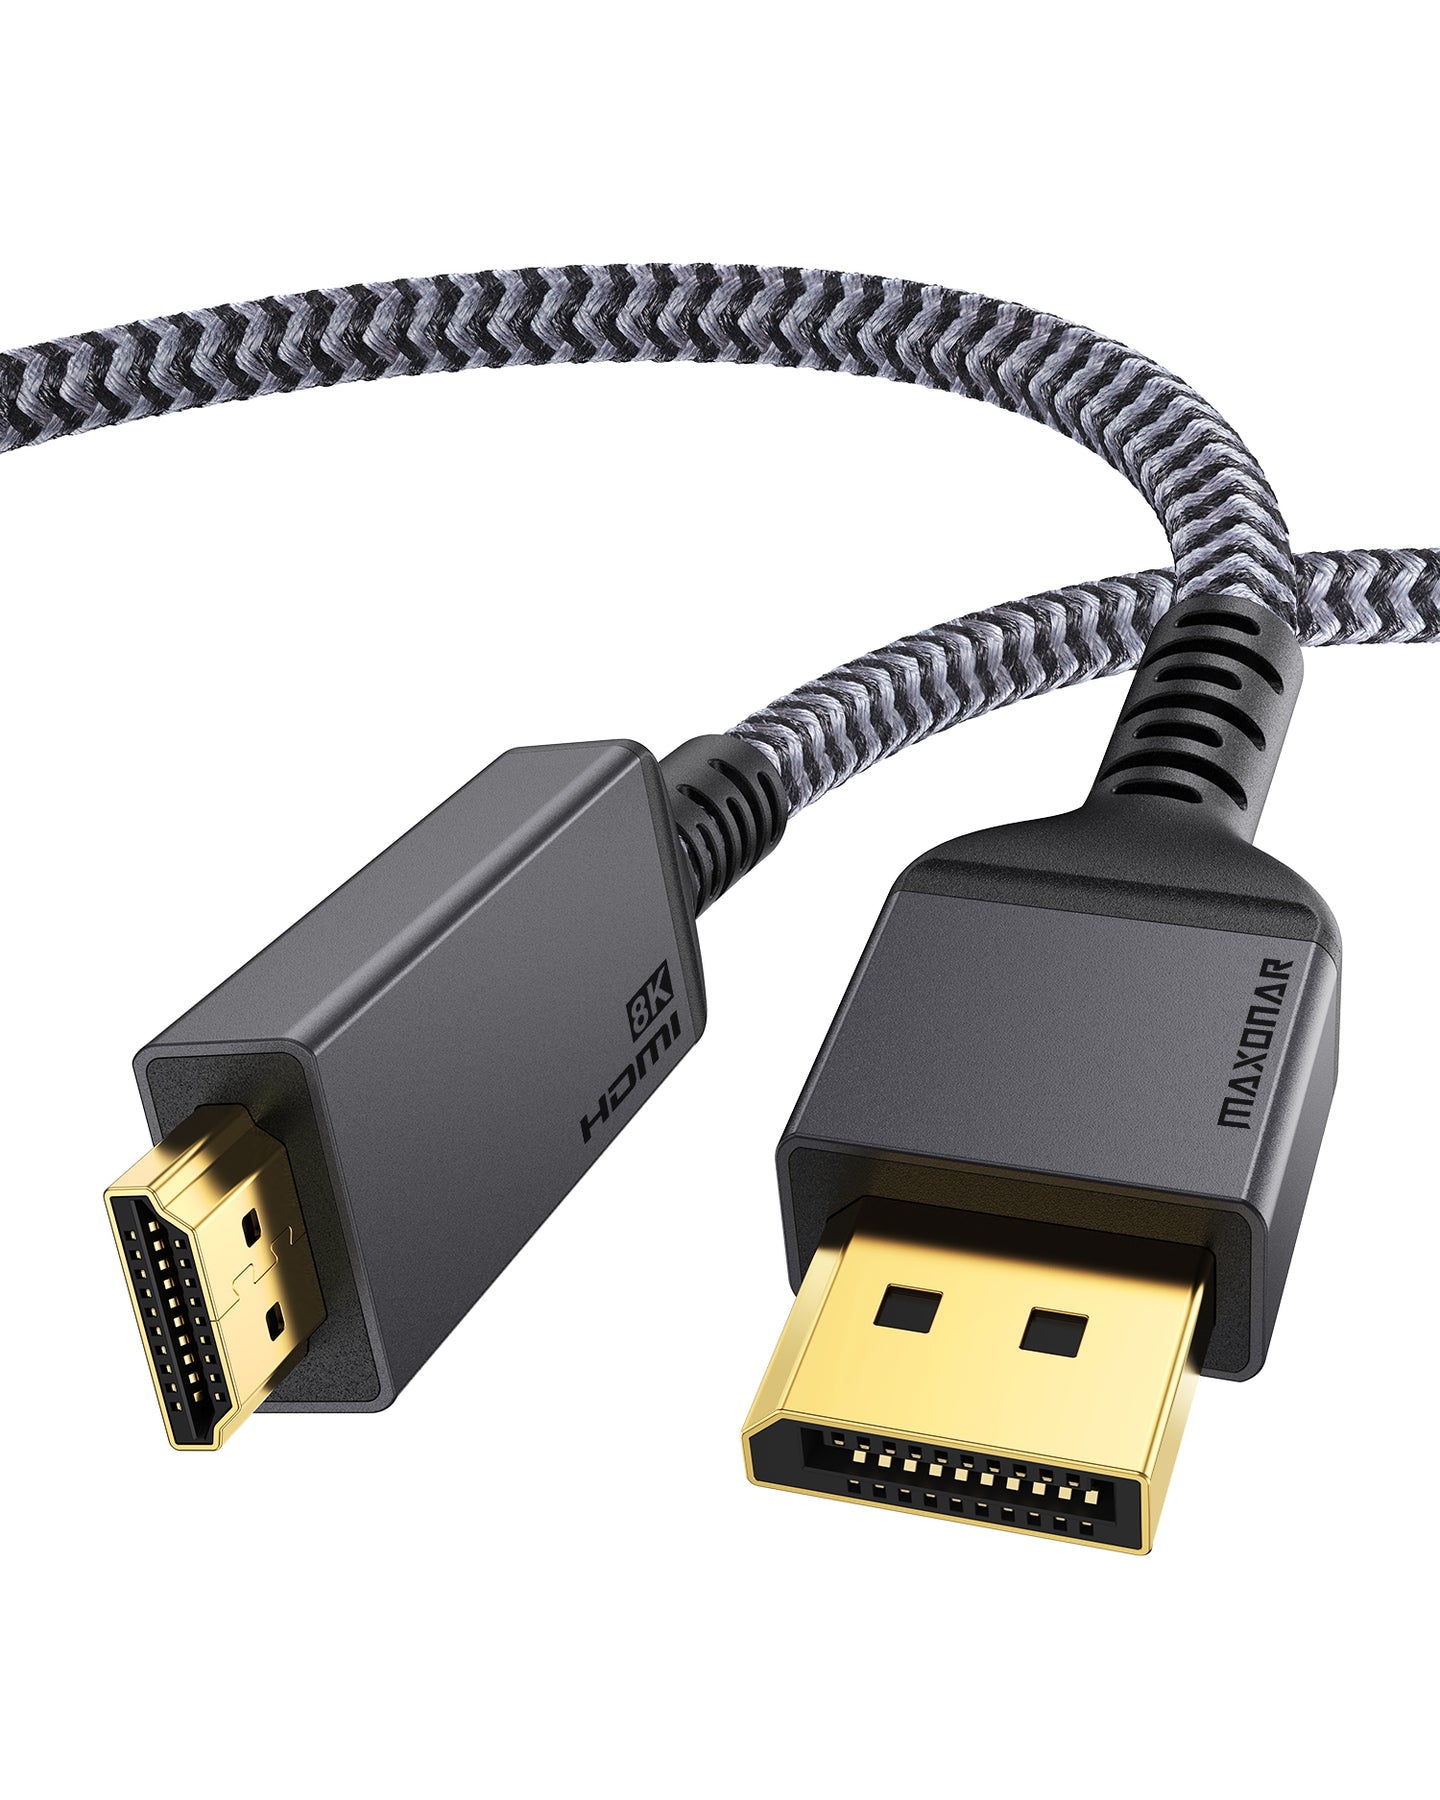 12ft/4m Certified HDMI 2.1 Cable - 8K/4K - HDMI® Cables & HDMI Adapters